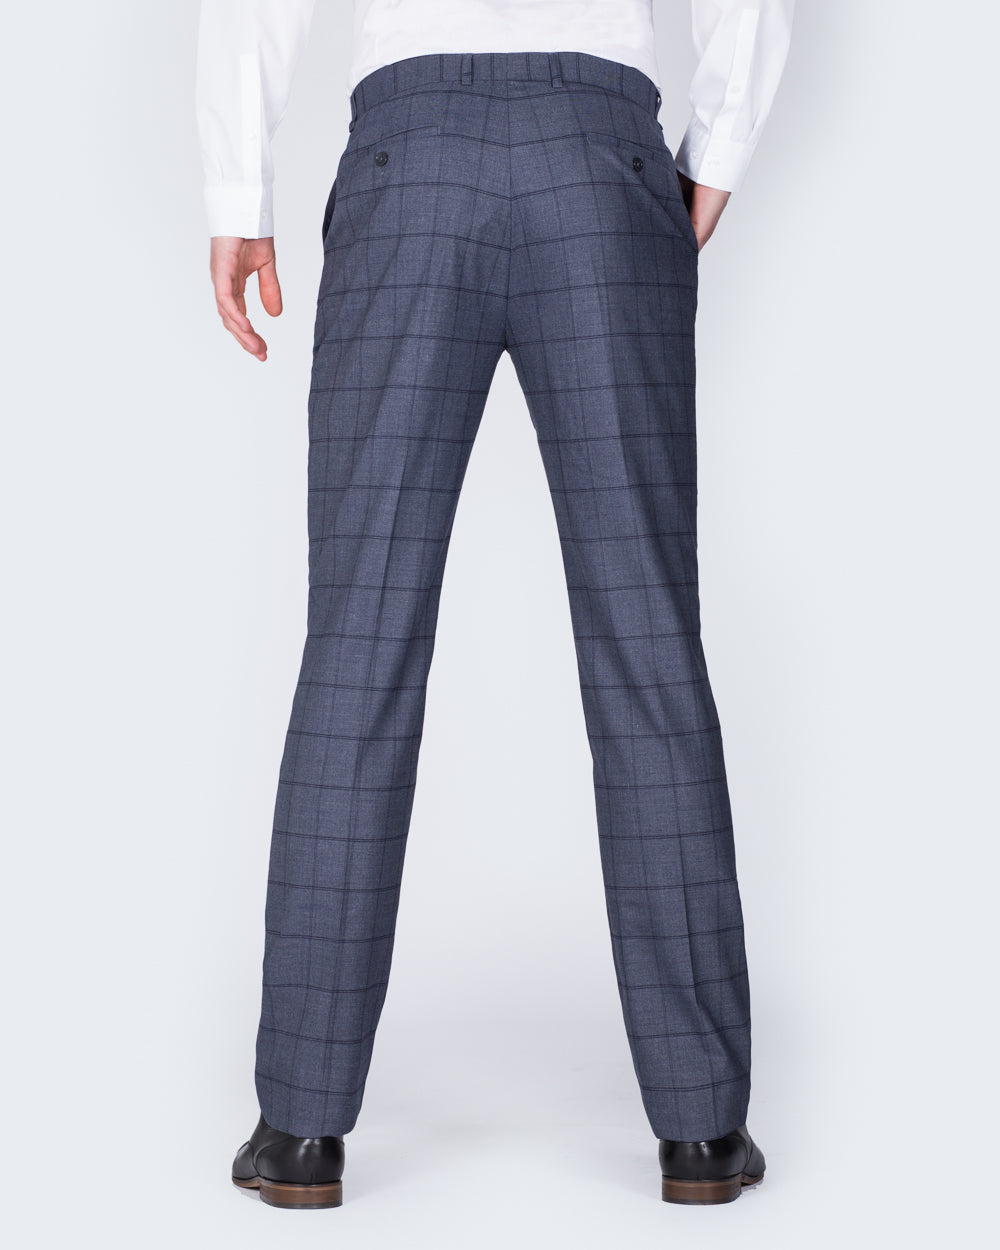 2t Slim Fit Tall Trousers (blue check)-42-40